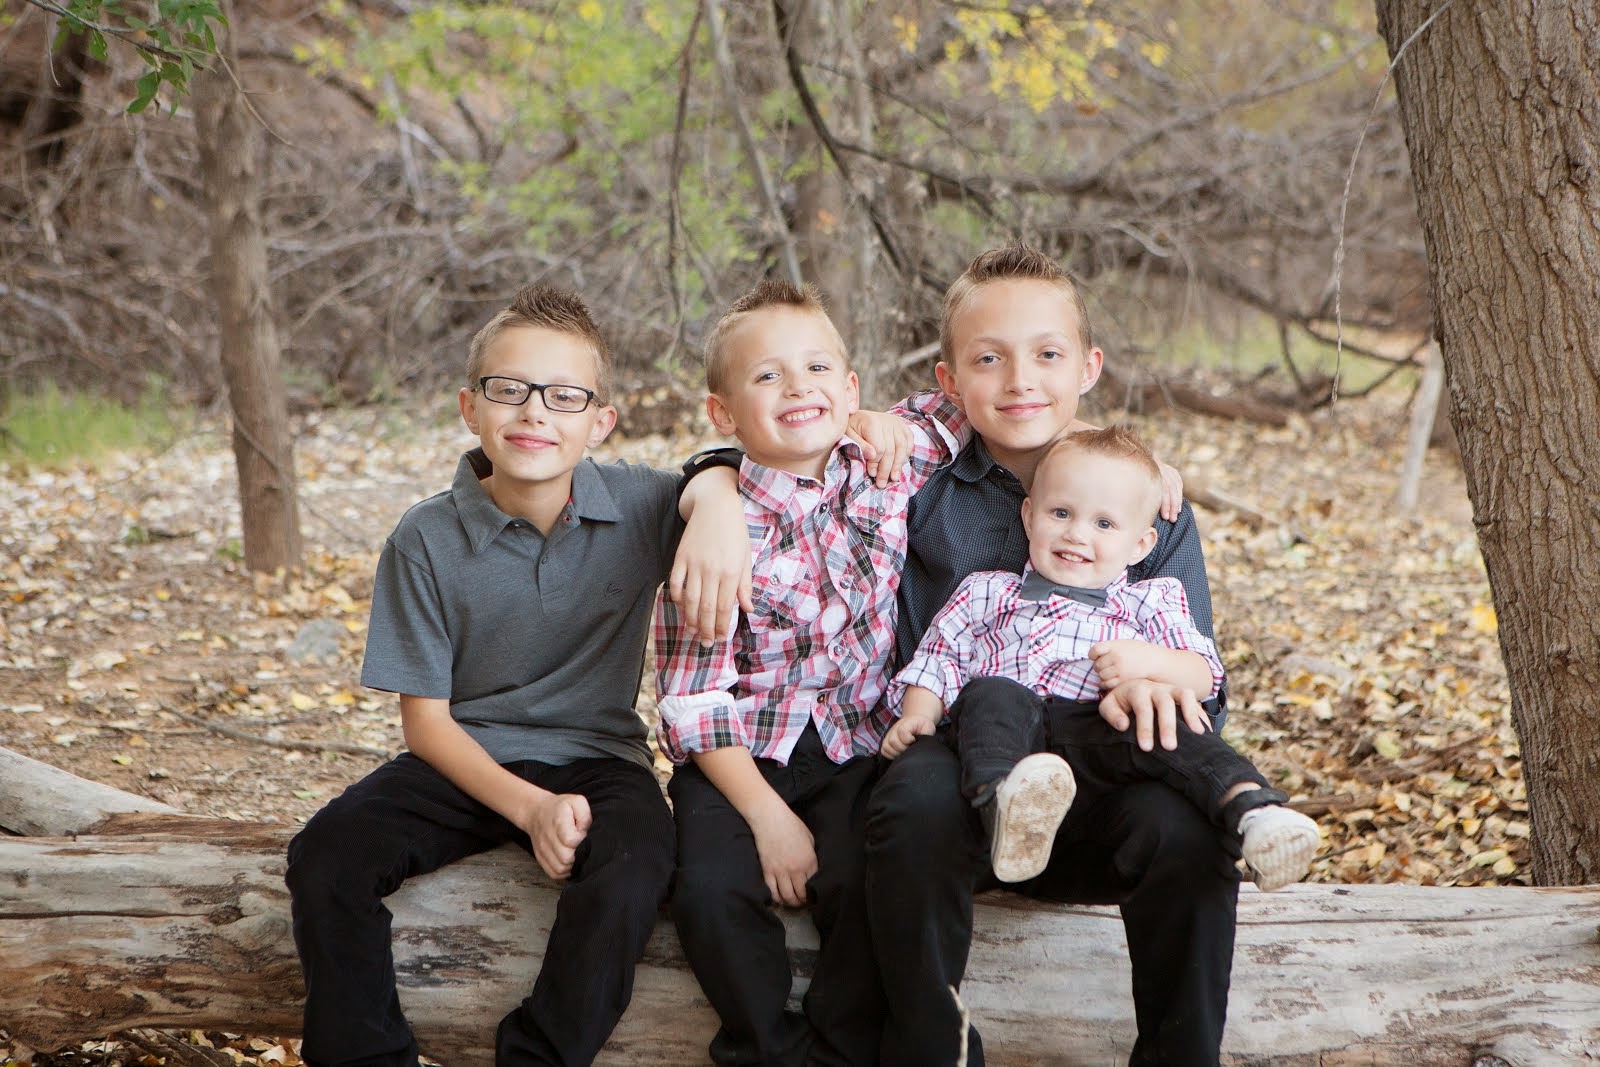 I'm the lucky mom of 4 very sweet boys!